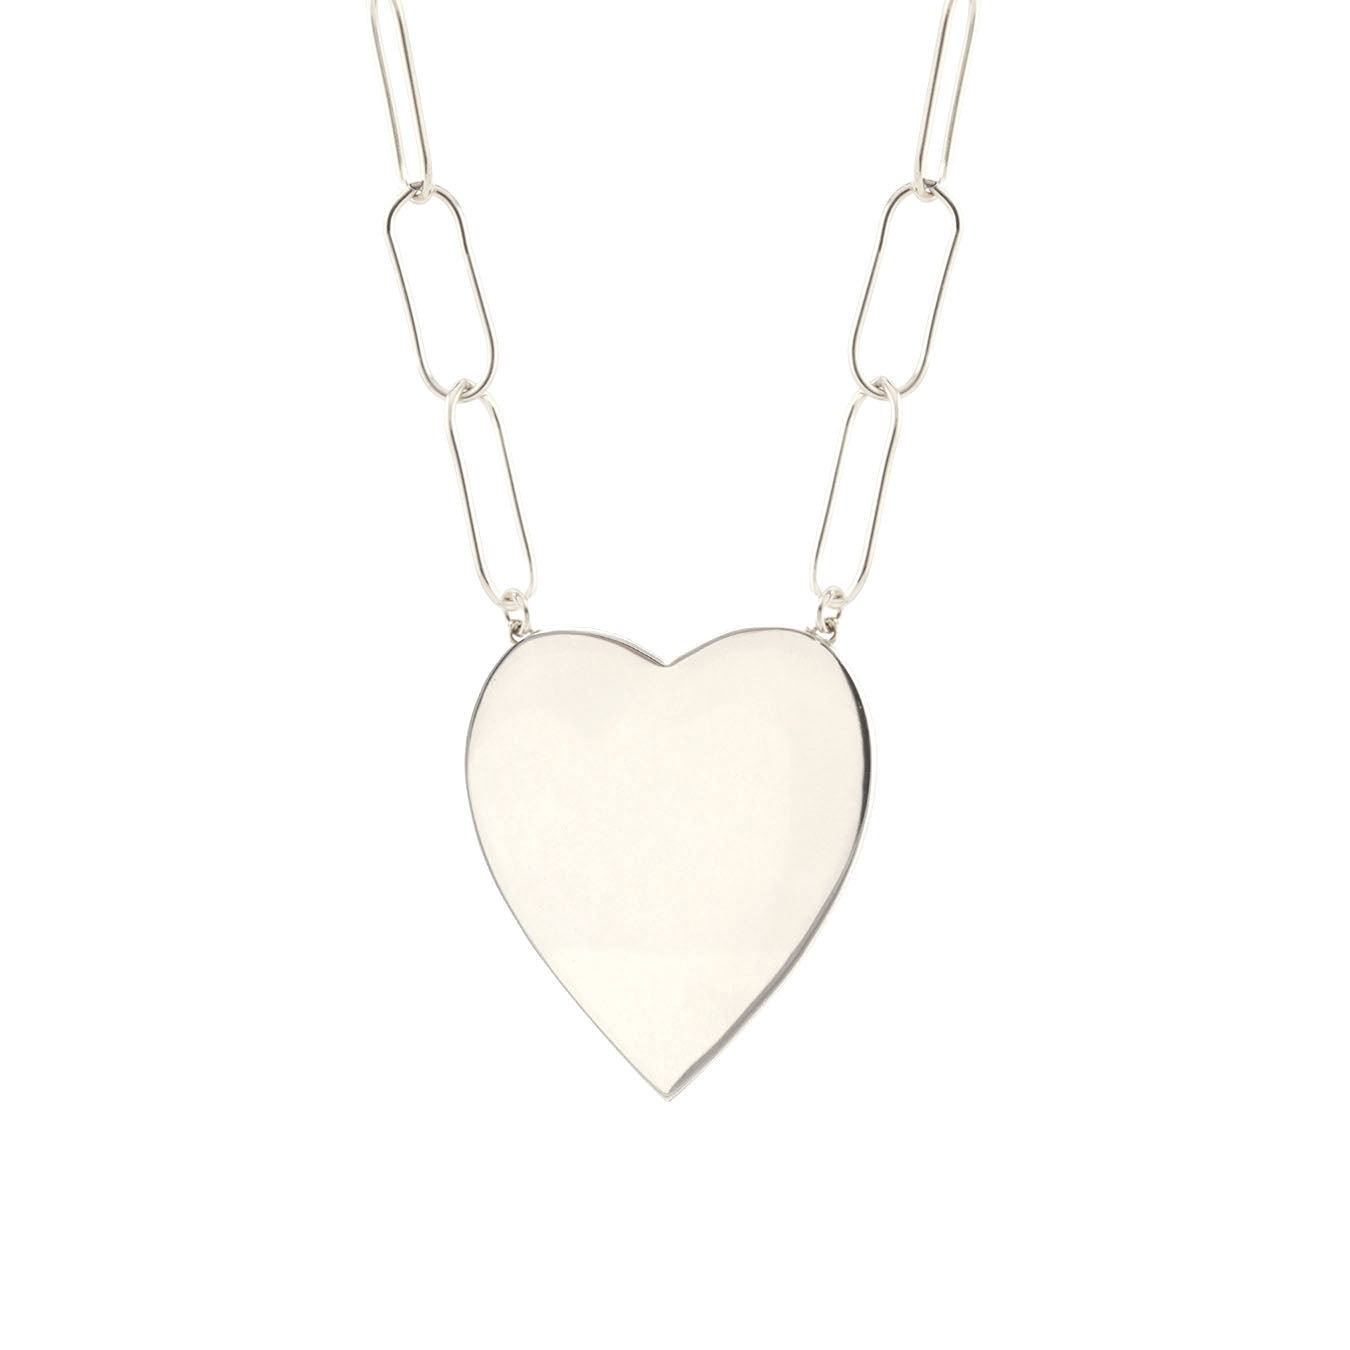 Pave' CZ Pointed Heart Necklace | Alexandra Marks Jewelry